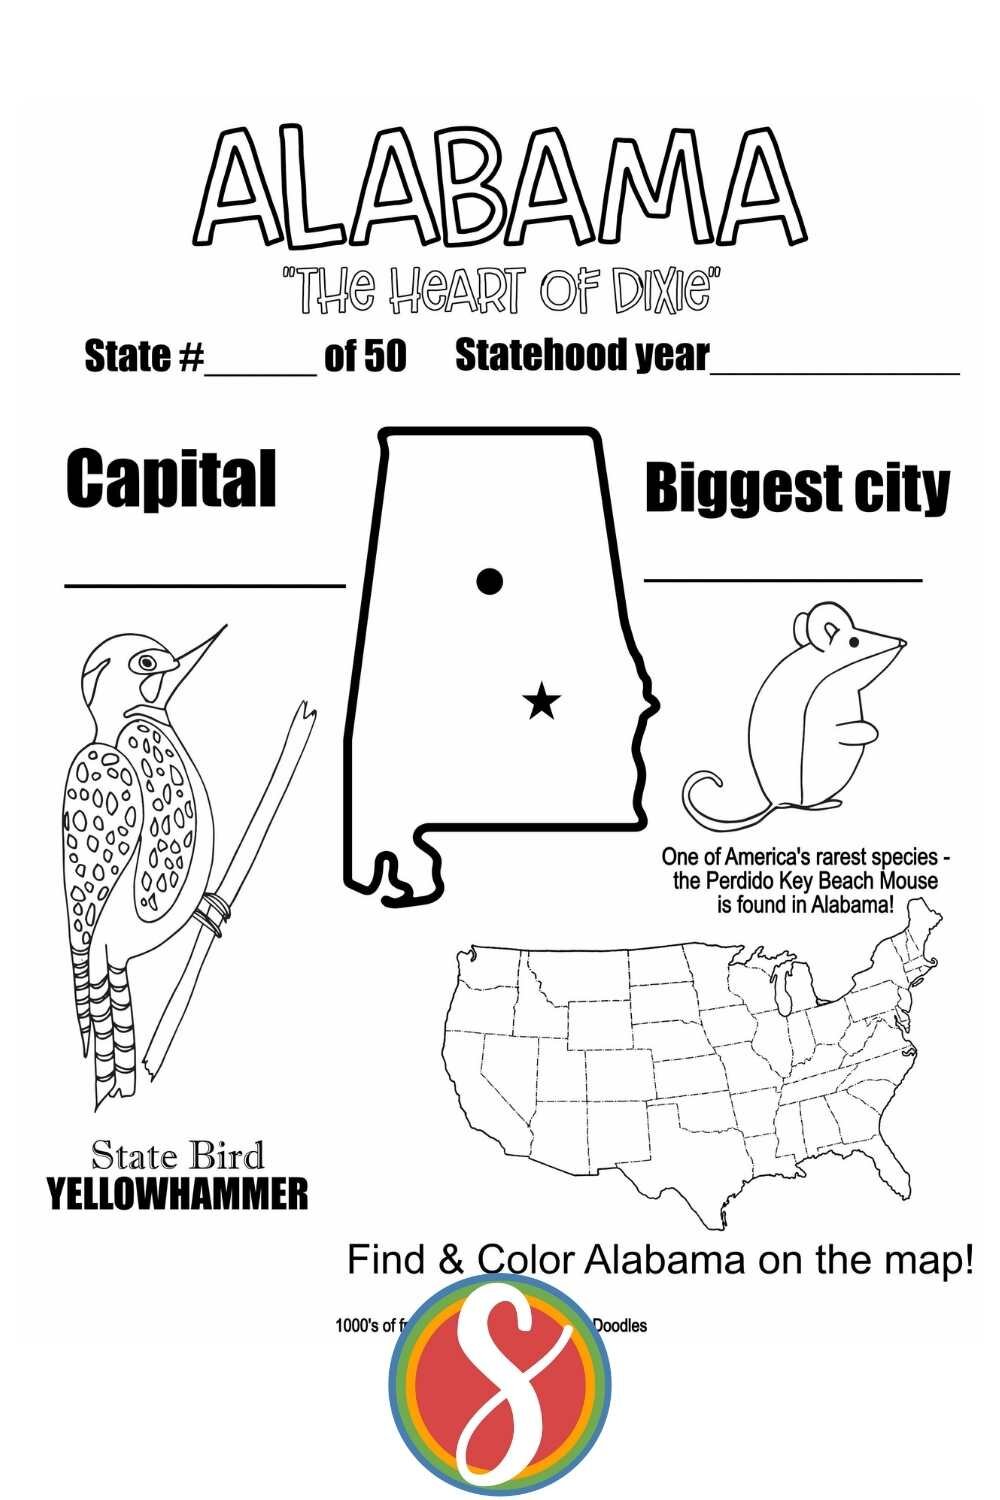 Alabama facts coloring page, US map, Alabama state outline, beach mouse, yellowhammer